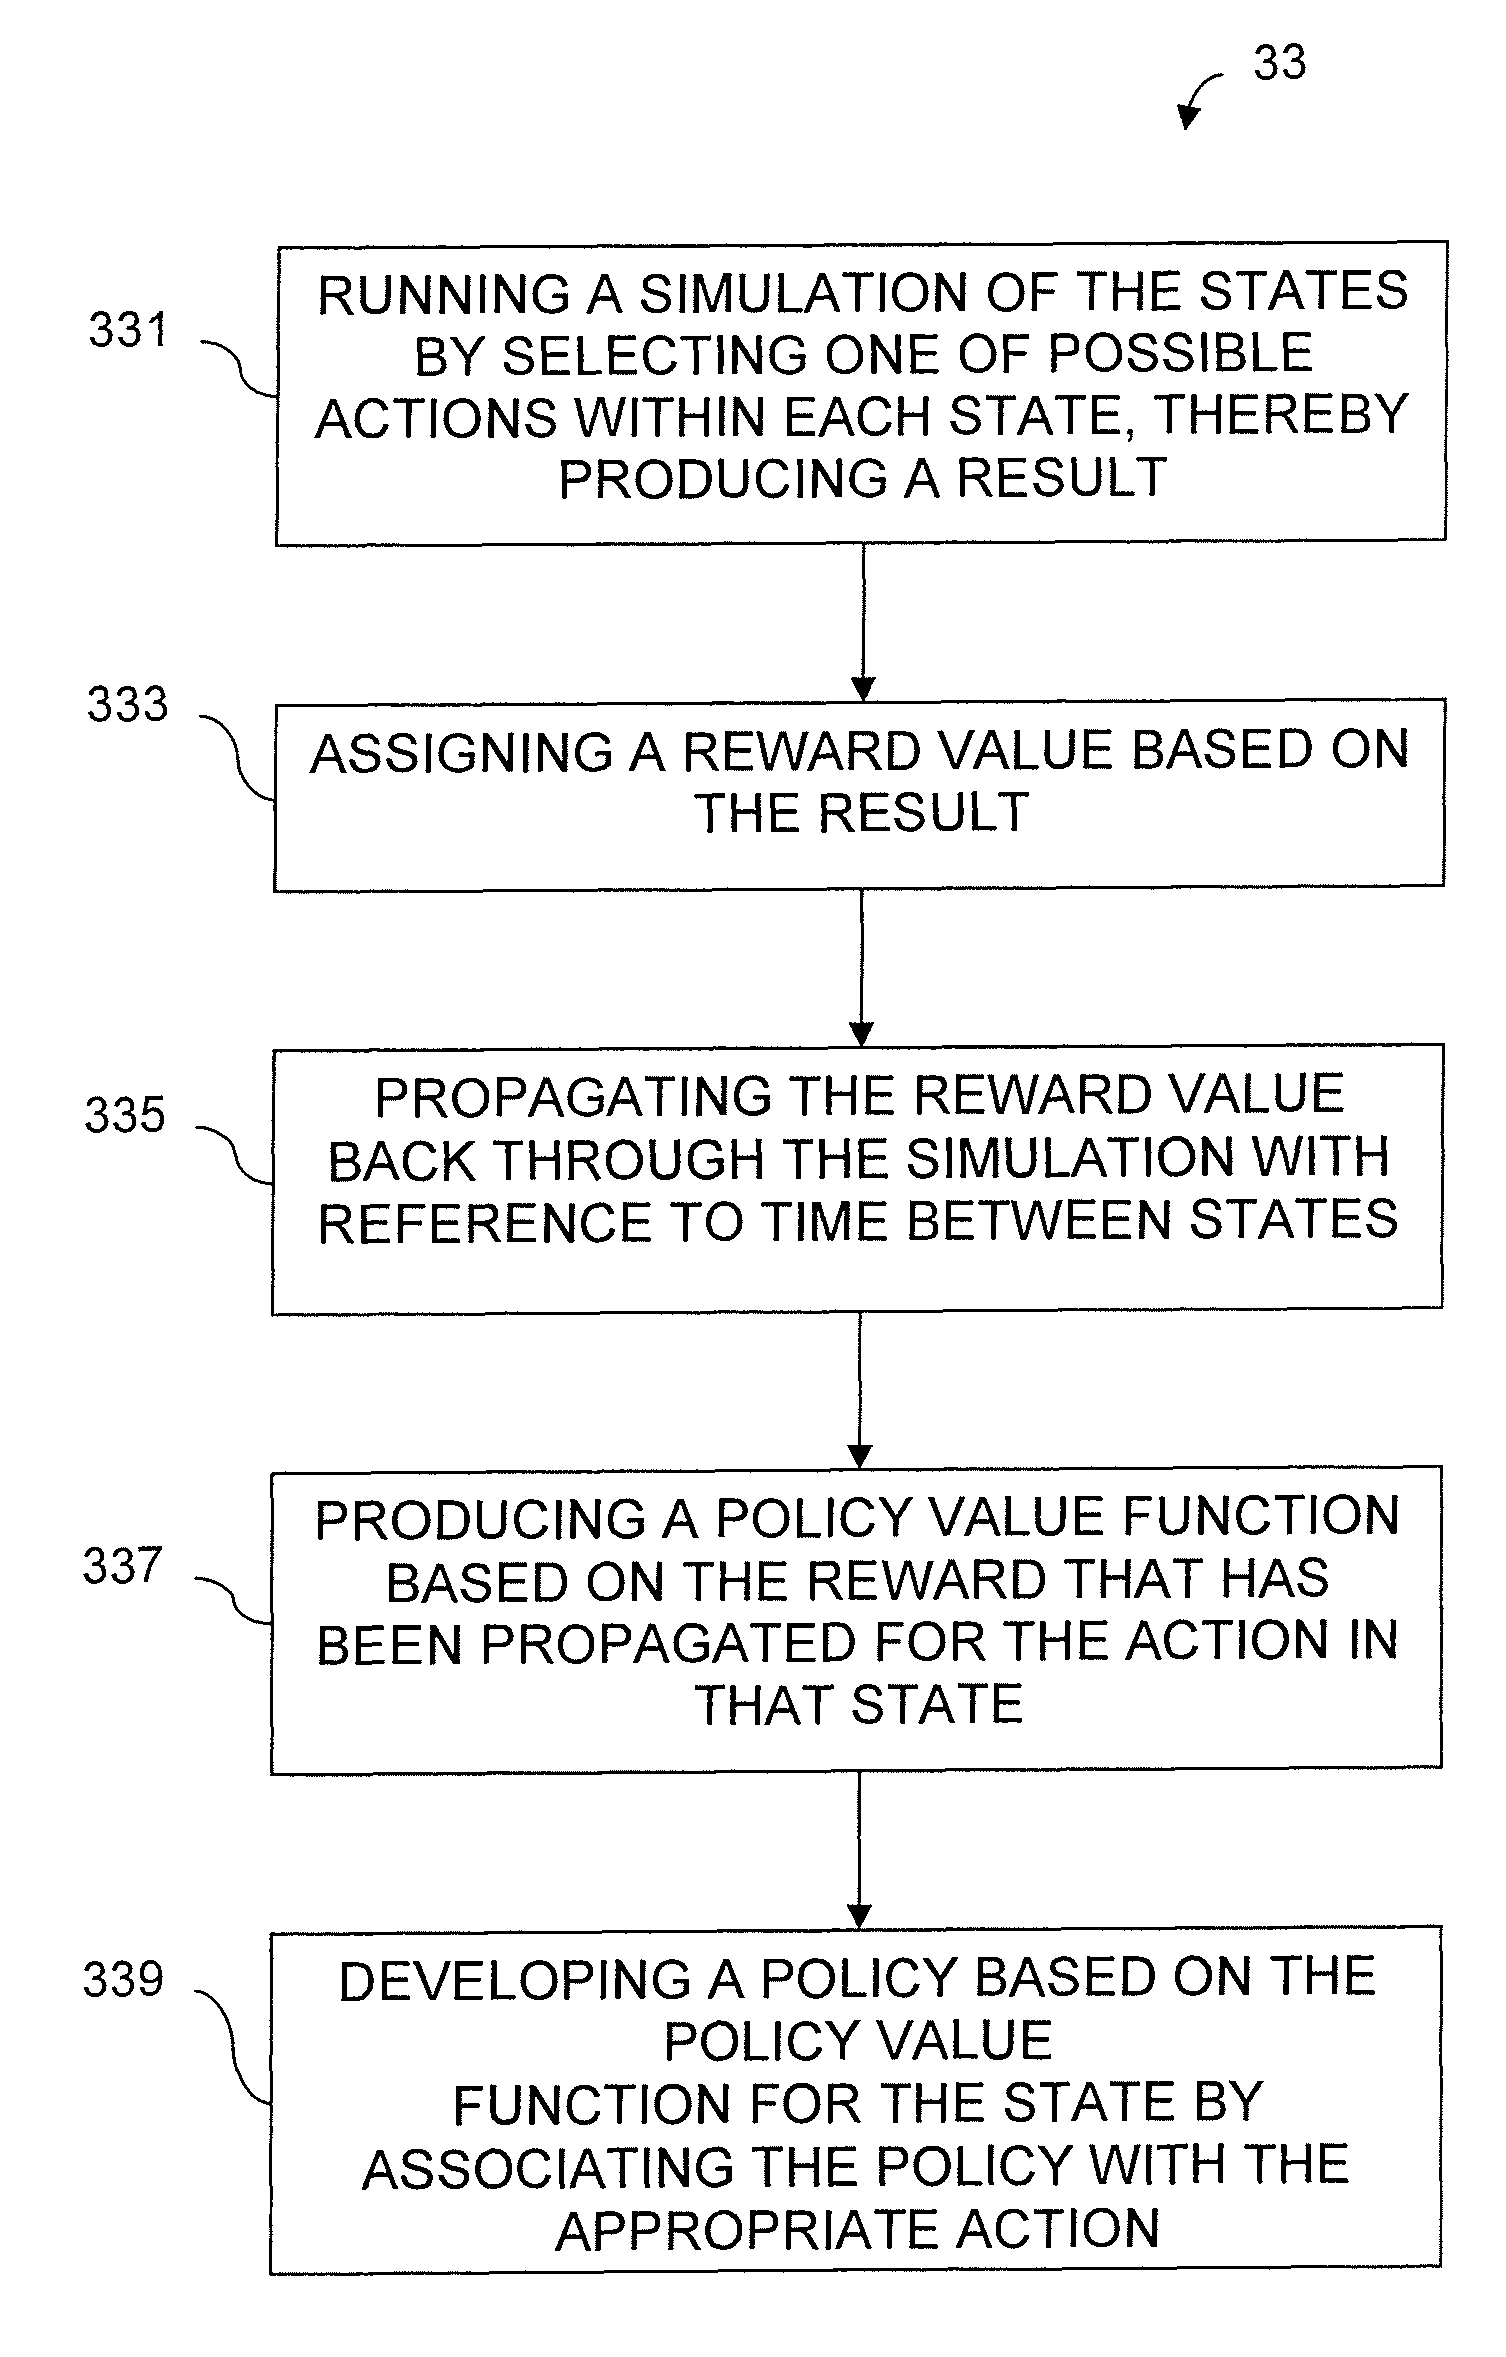 Vehicle dispatching method and system